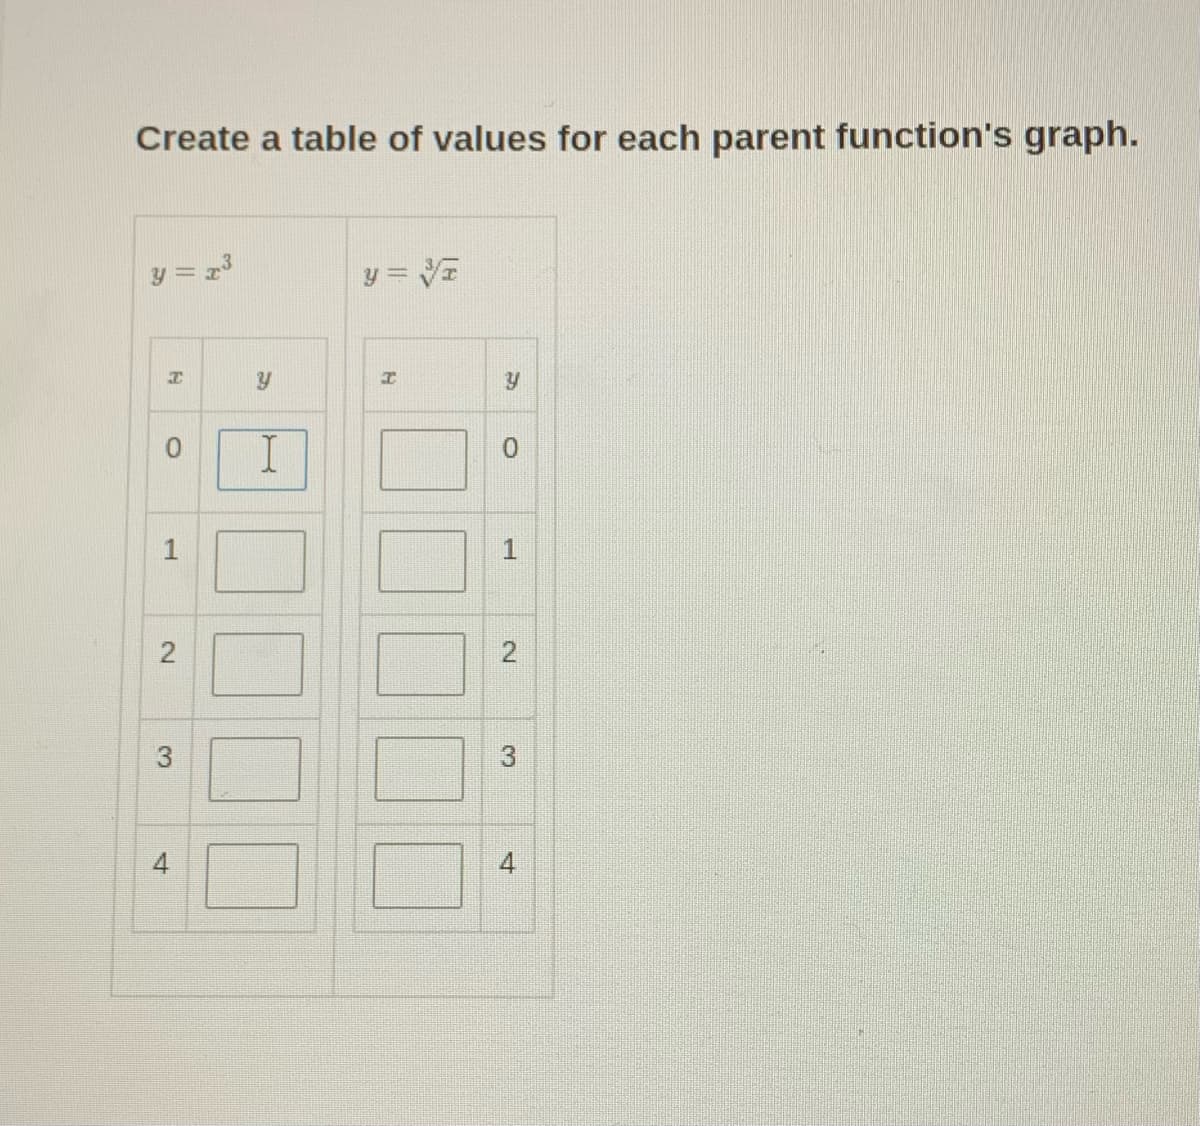 Create a table of values for each parent function's graph.
y = VE
0.
2.
3.
4.
||
2.
3,
4.
